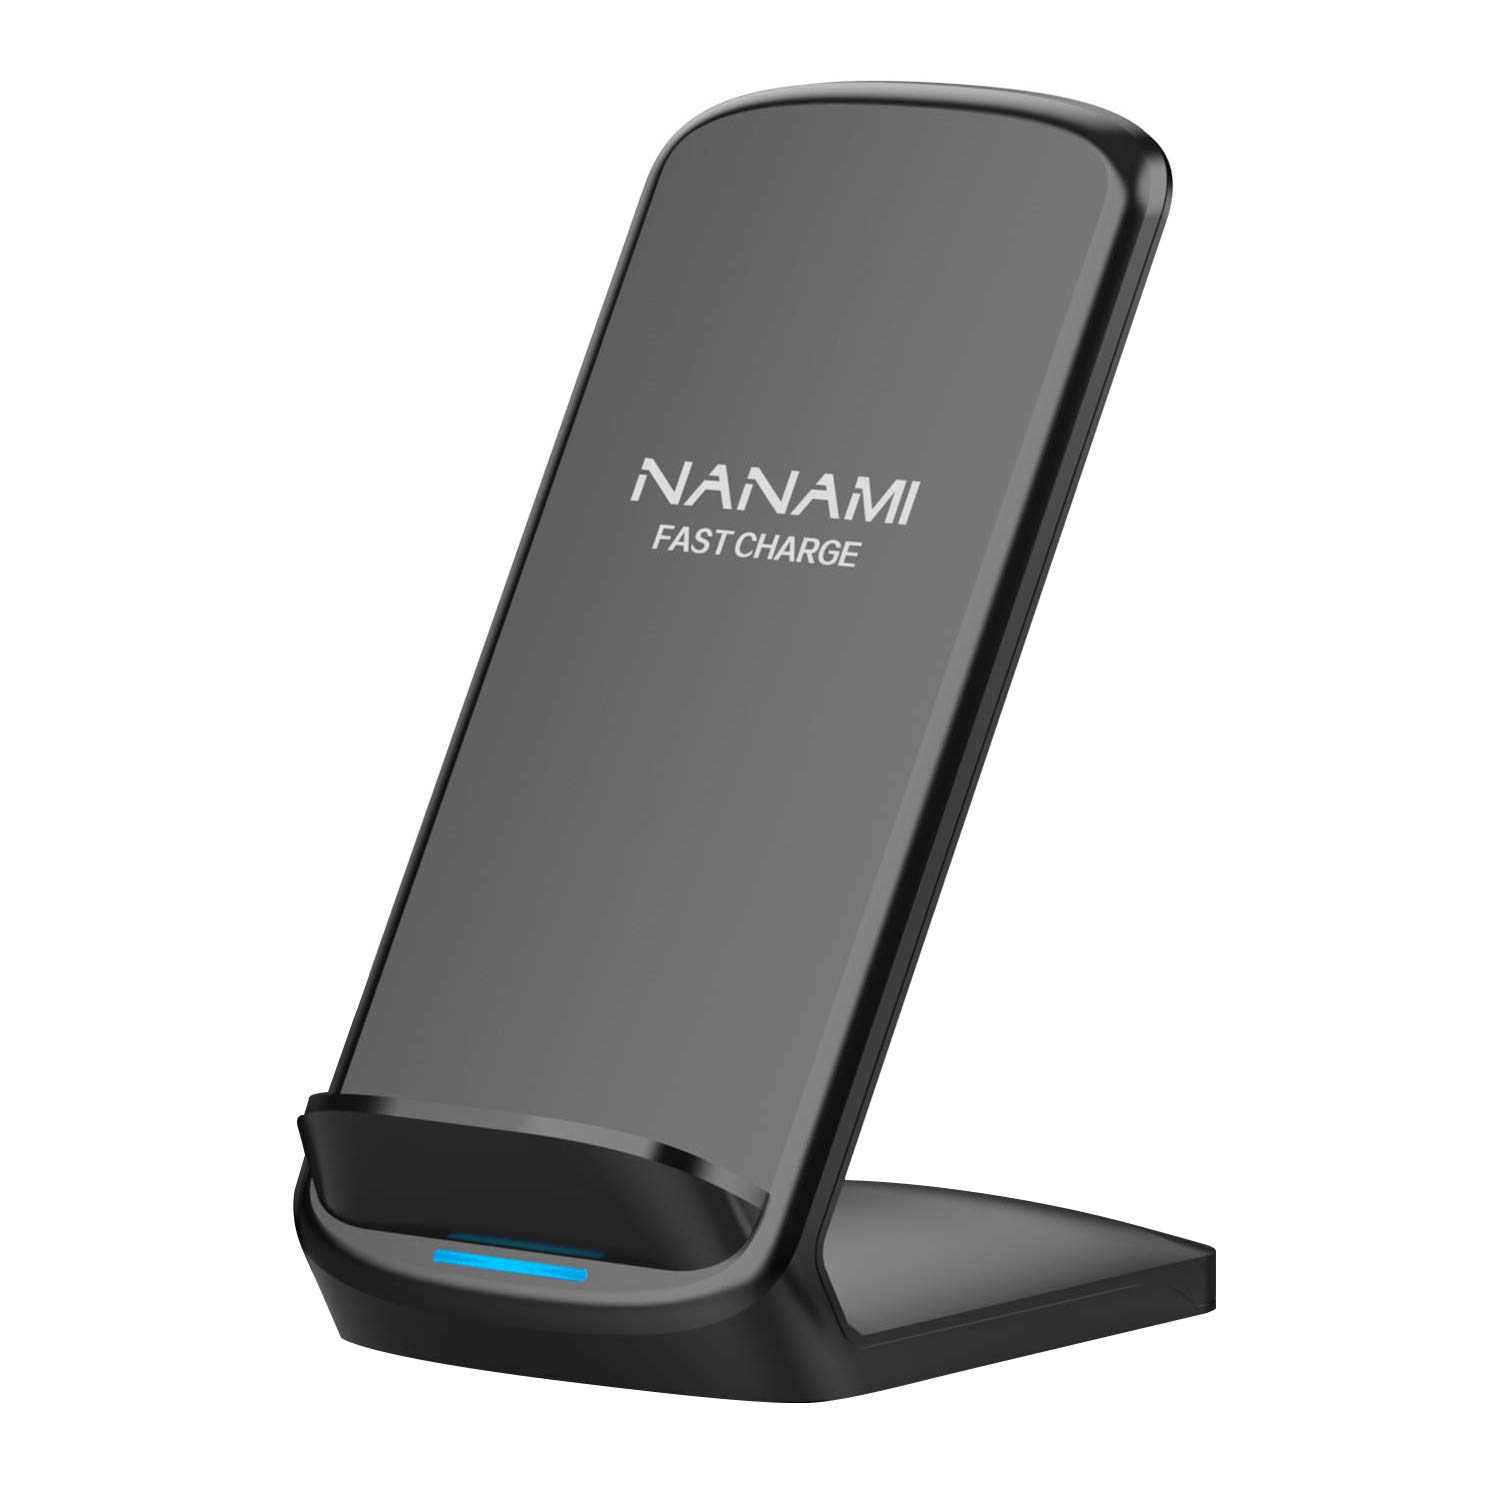 Afsnijden Indrukwekkend Uitpakken A800 black NANAMI Upgraded Fast Wireless Charger Fast Wireless Charging  Stand Compatible Samsung Galaxy S10+/S9/S8/S7 Edge/Note 10/9/8 & Qi Charger  Compatible iPhone 11/11 Pro/11 Pro Max/XR/XS Max/XS/X/8/8 Plus - NANAMI FAST  WIRELESS CHARGING LIFE